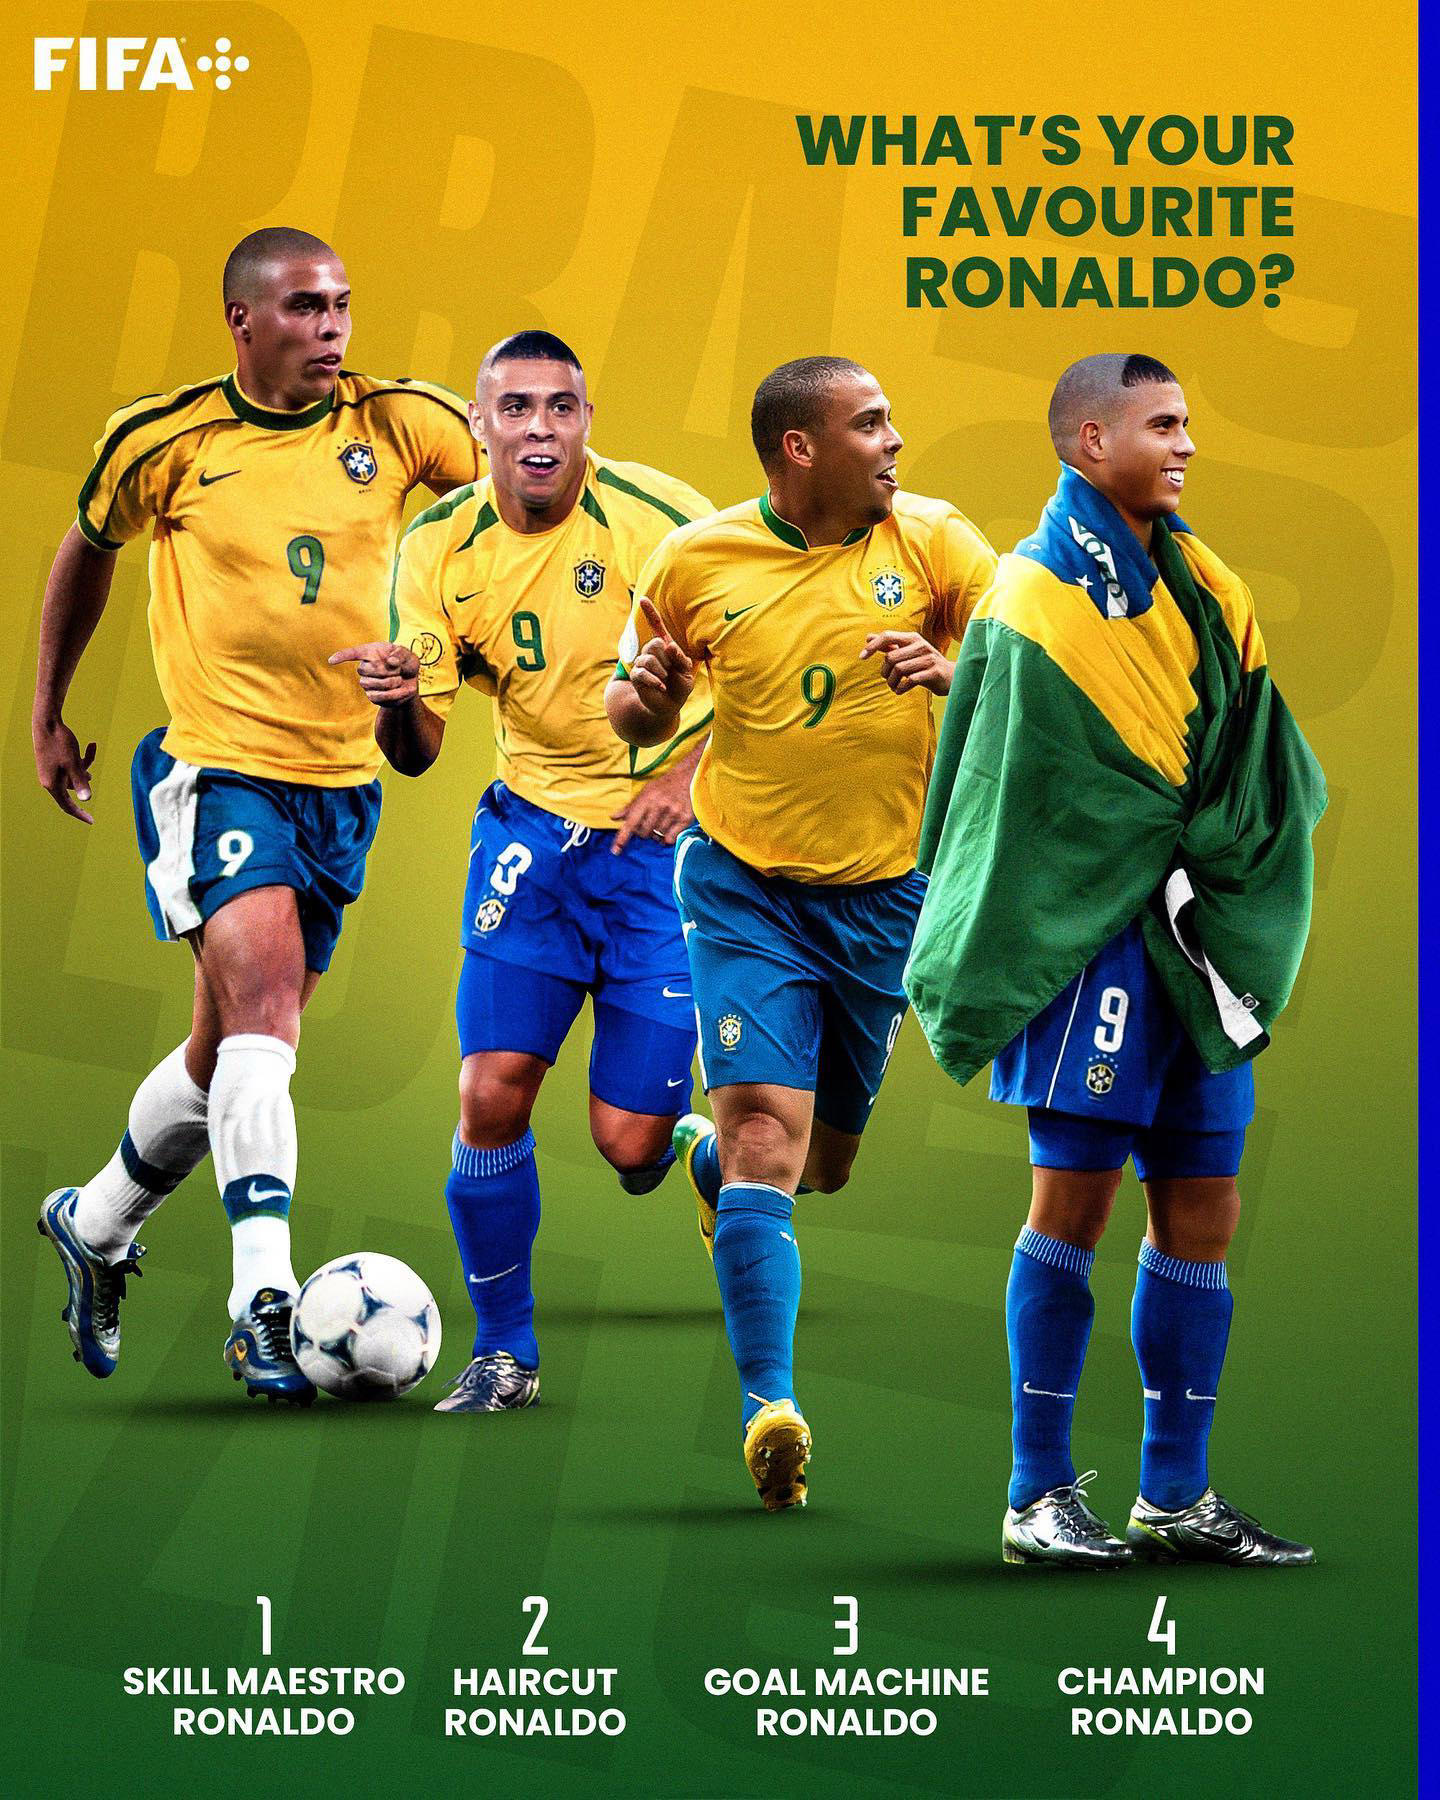 image 0 FIFA World Cup - Every version of O Fenomeno is… well, phenomenal